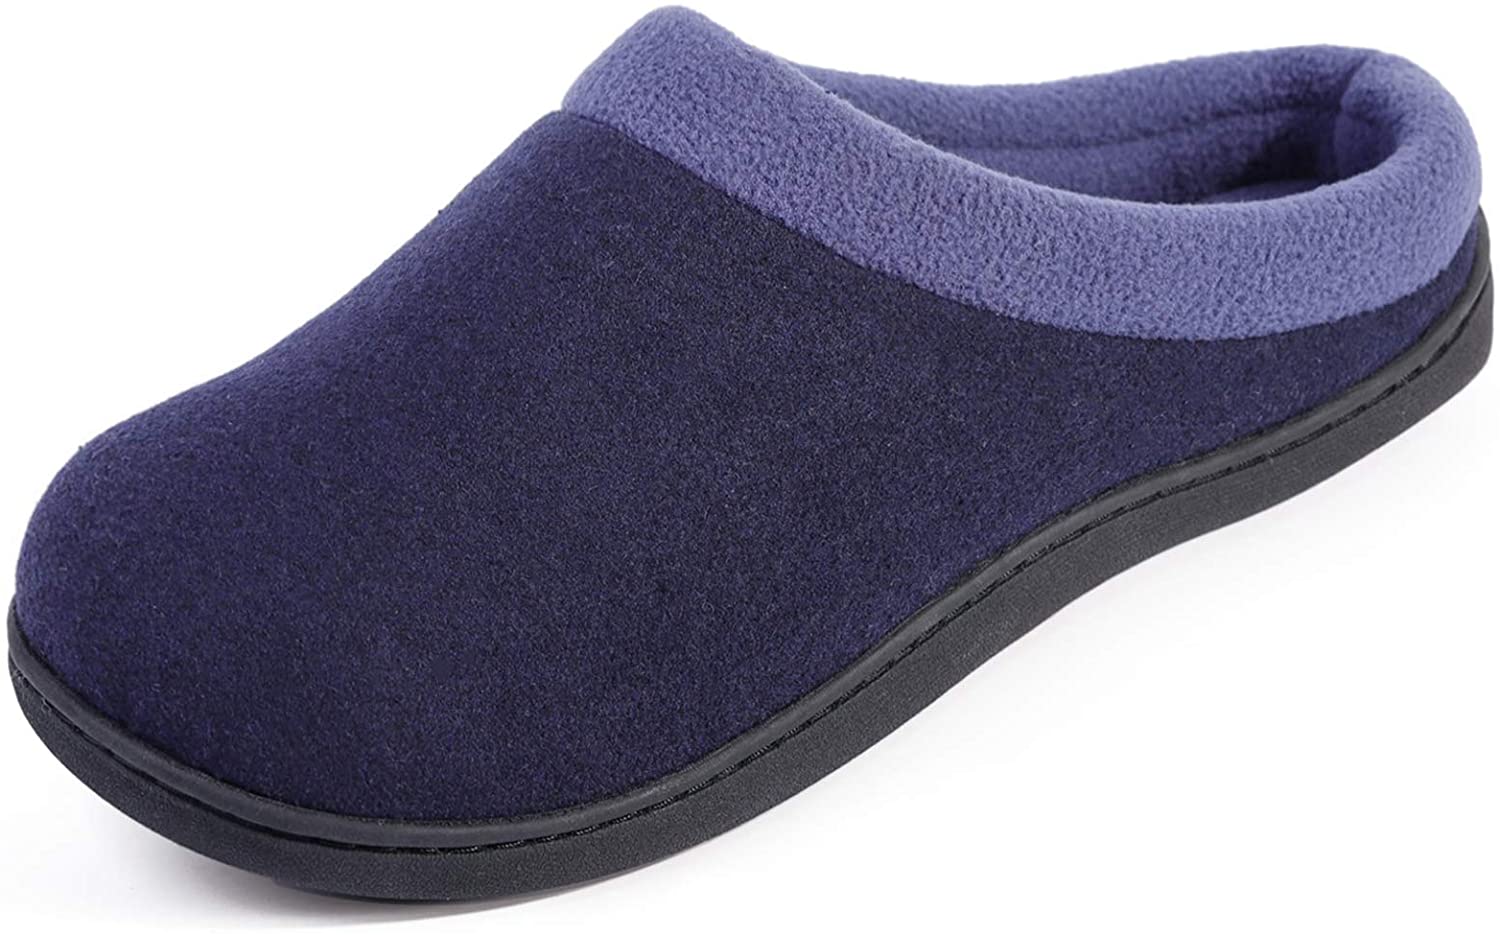 Breathable Indoor Shoes HomeIdeas Womens Woolen Fabric Memory Foam Anti-Slip House Slippers